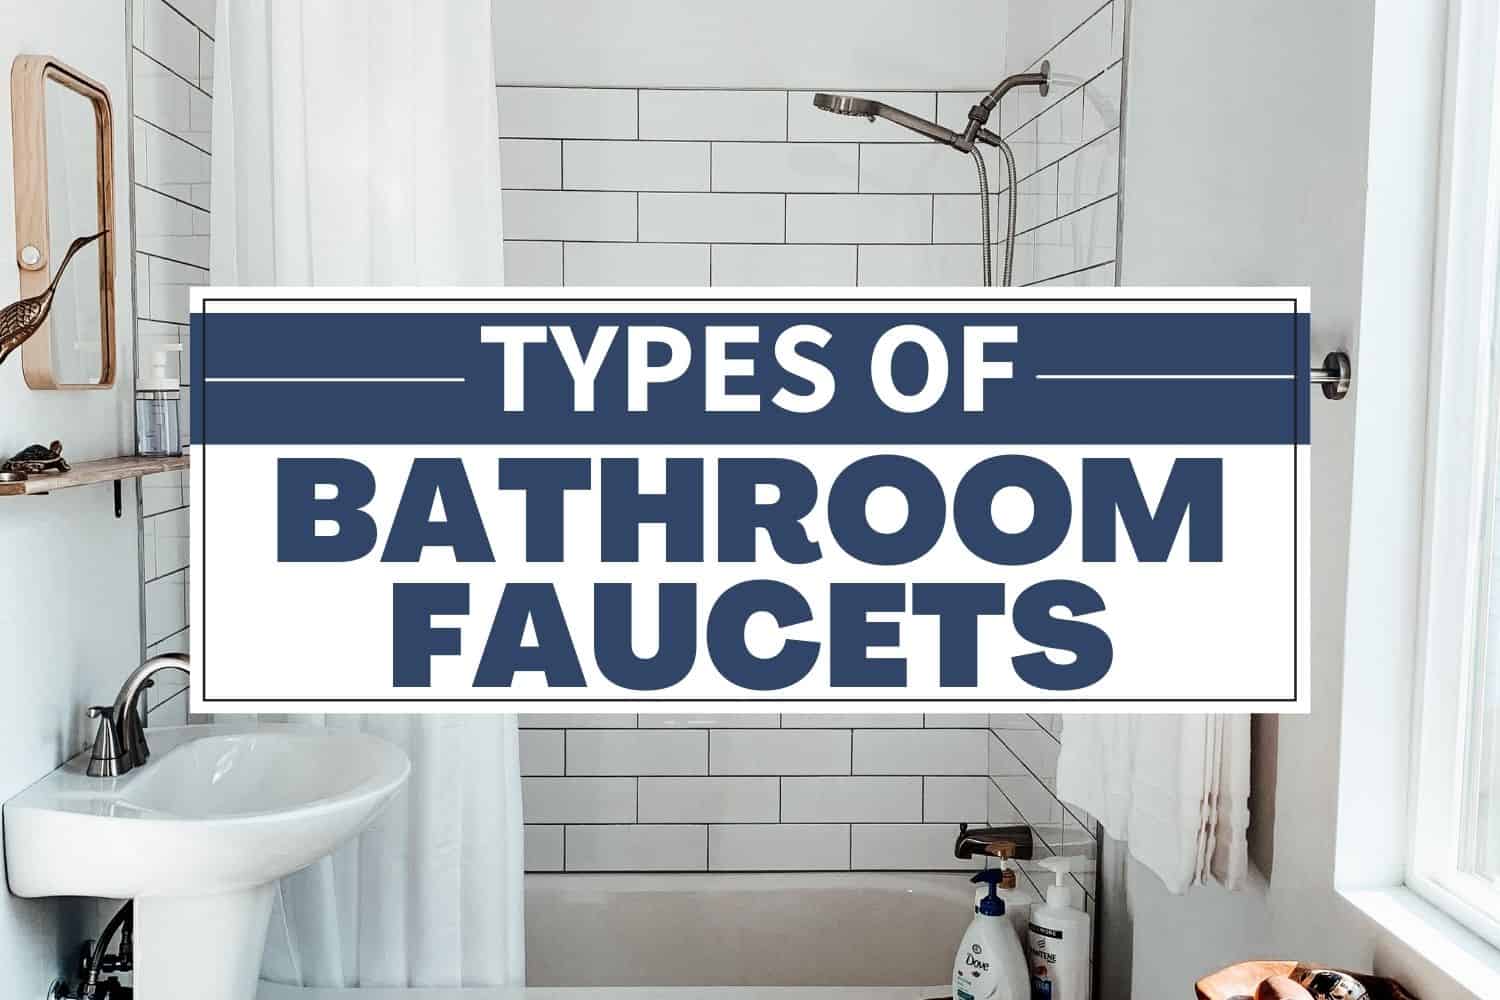 Types of bathroom faucets